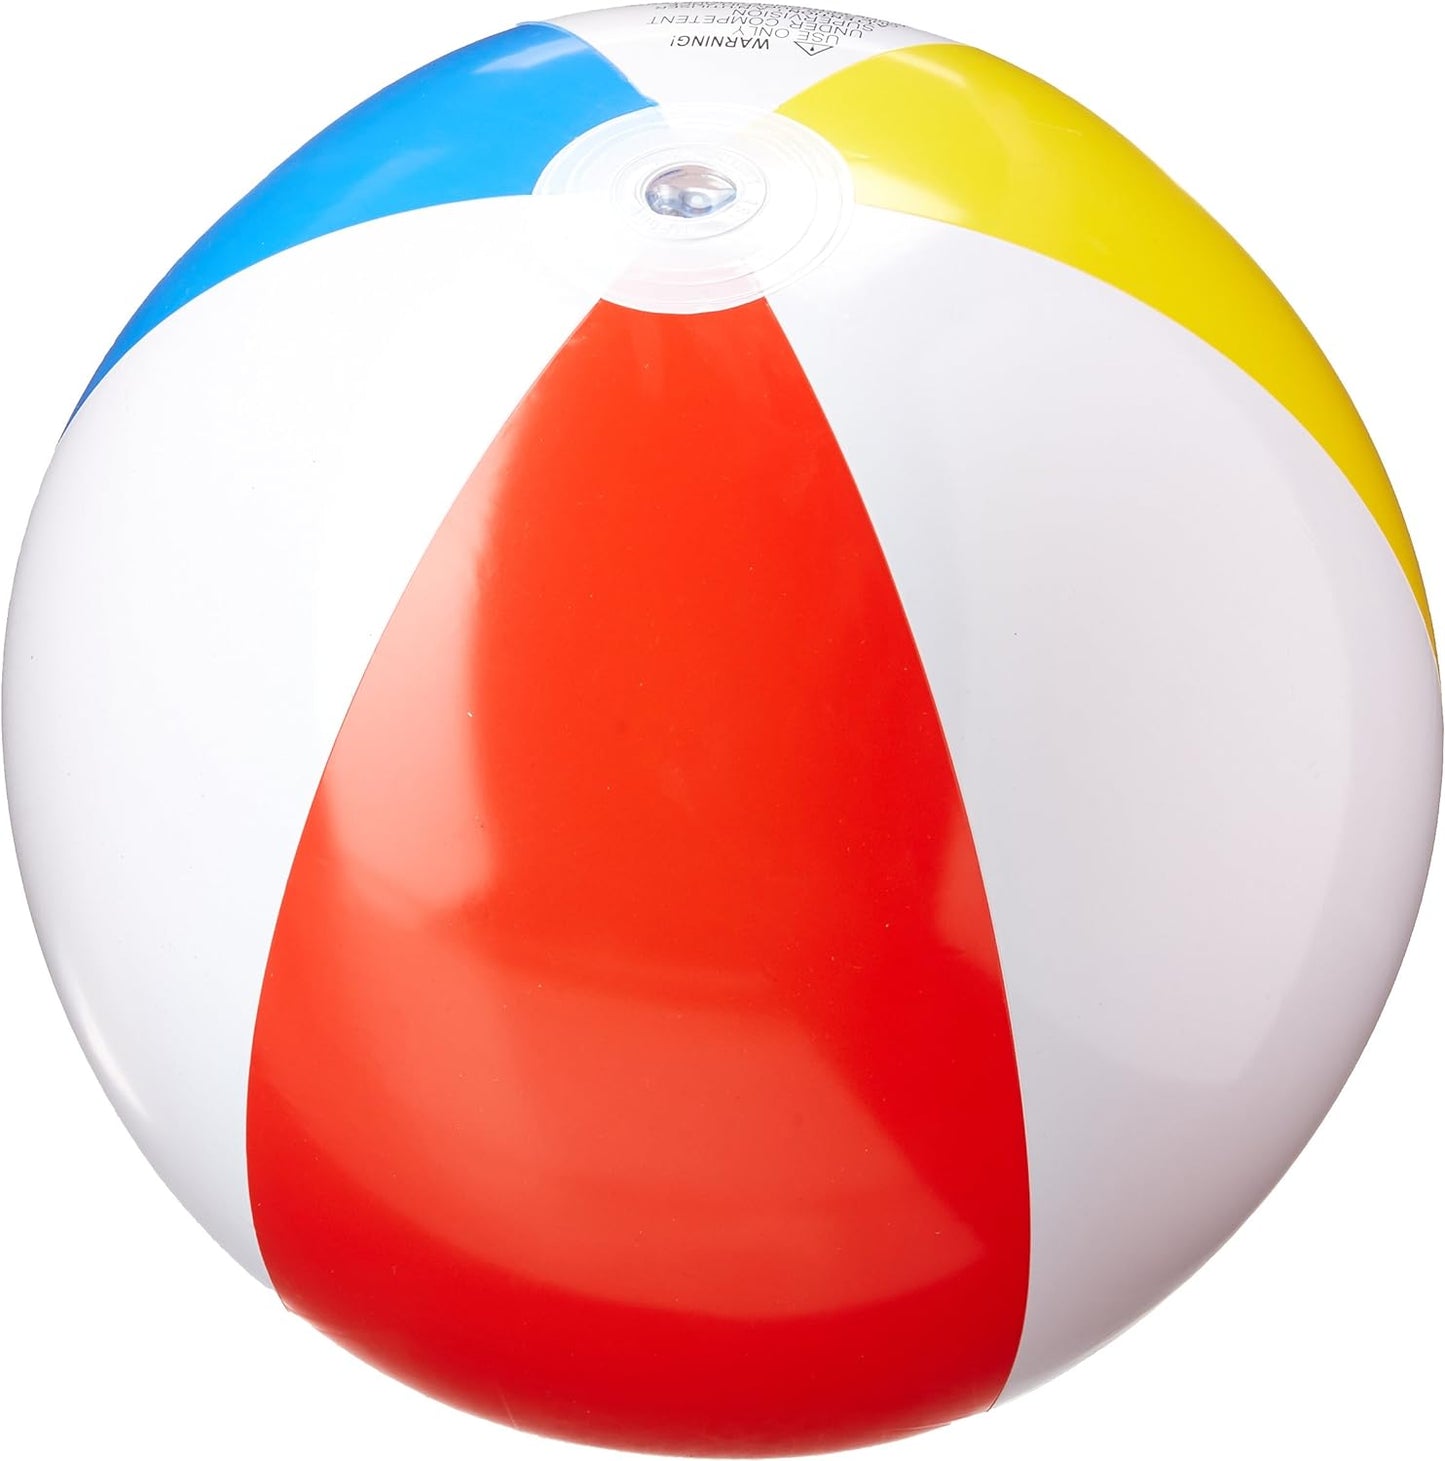 Fba_59020Ep 3 Pack Glossy Panel Colorful Beach Ball Inflatable Pool, 20"